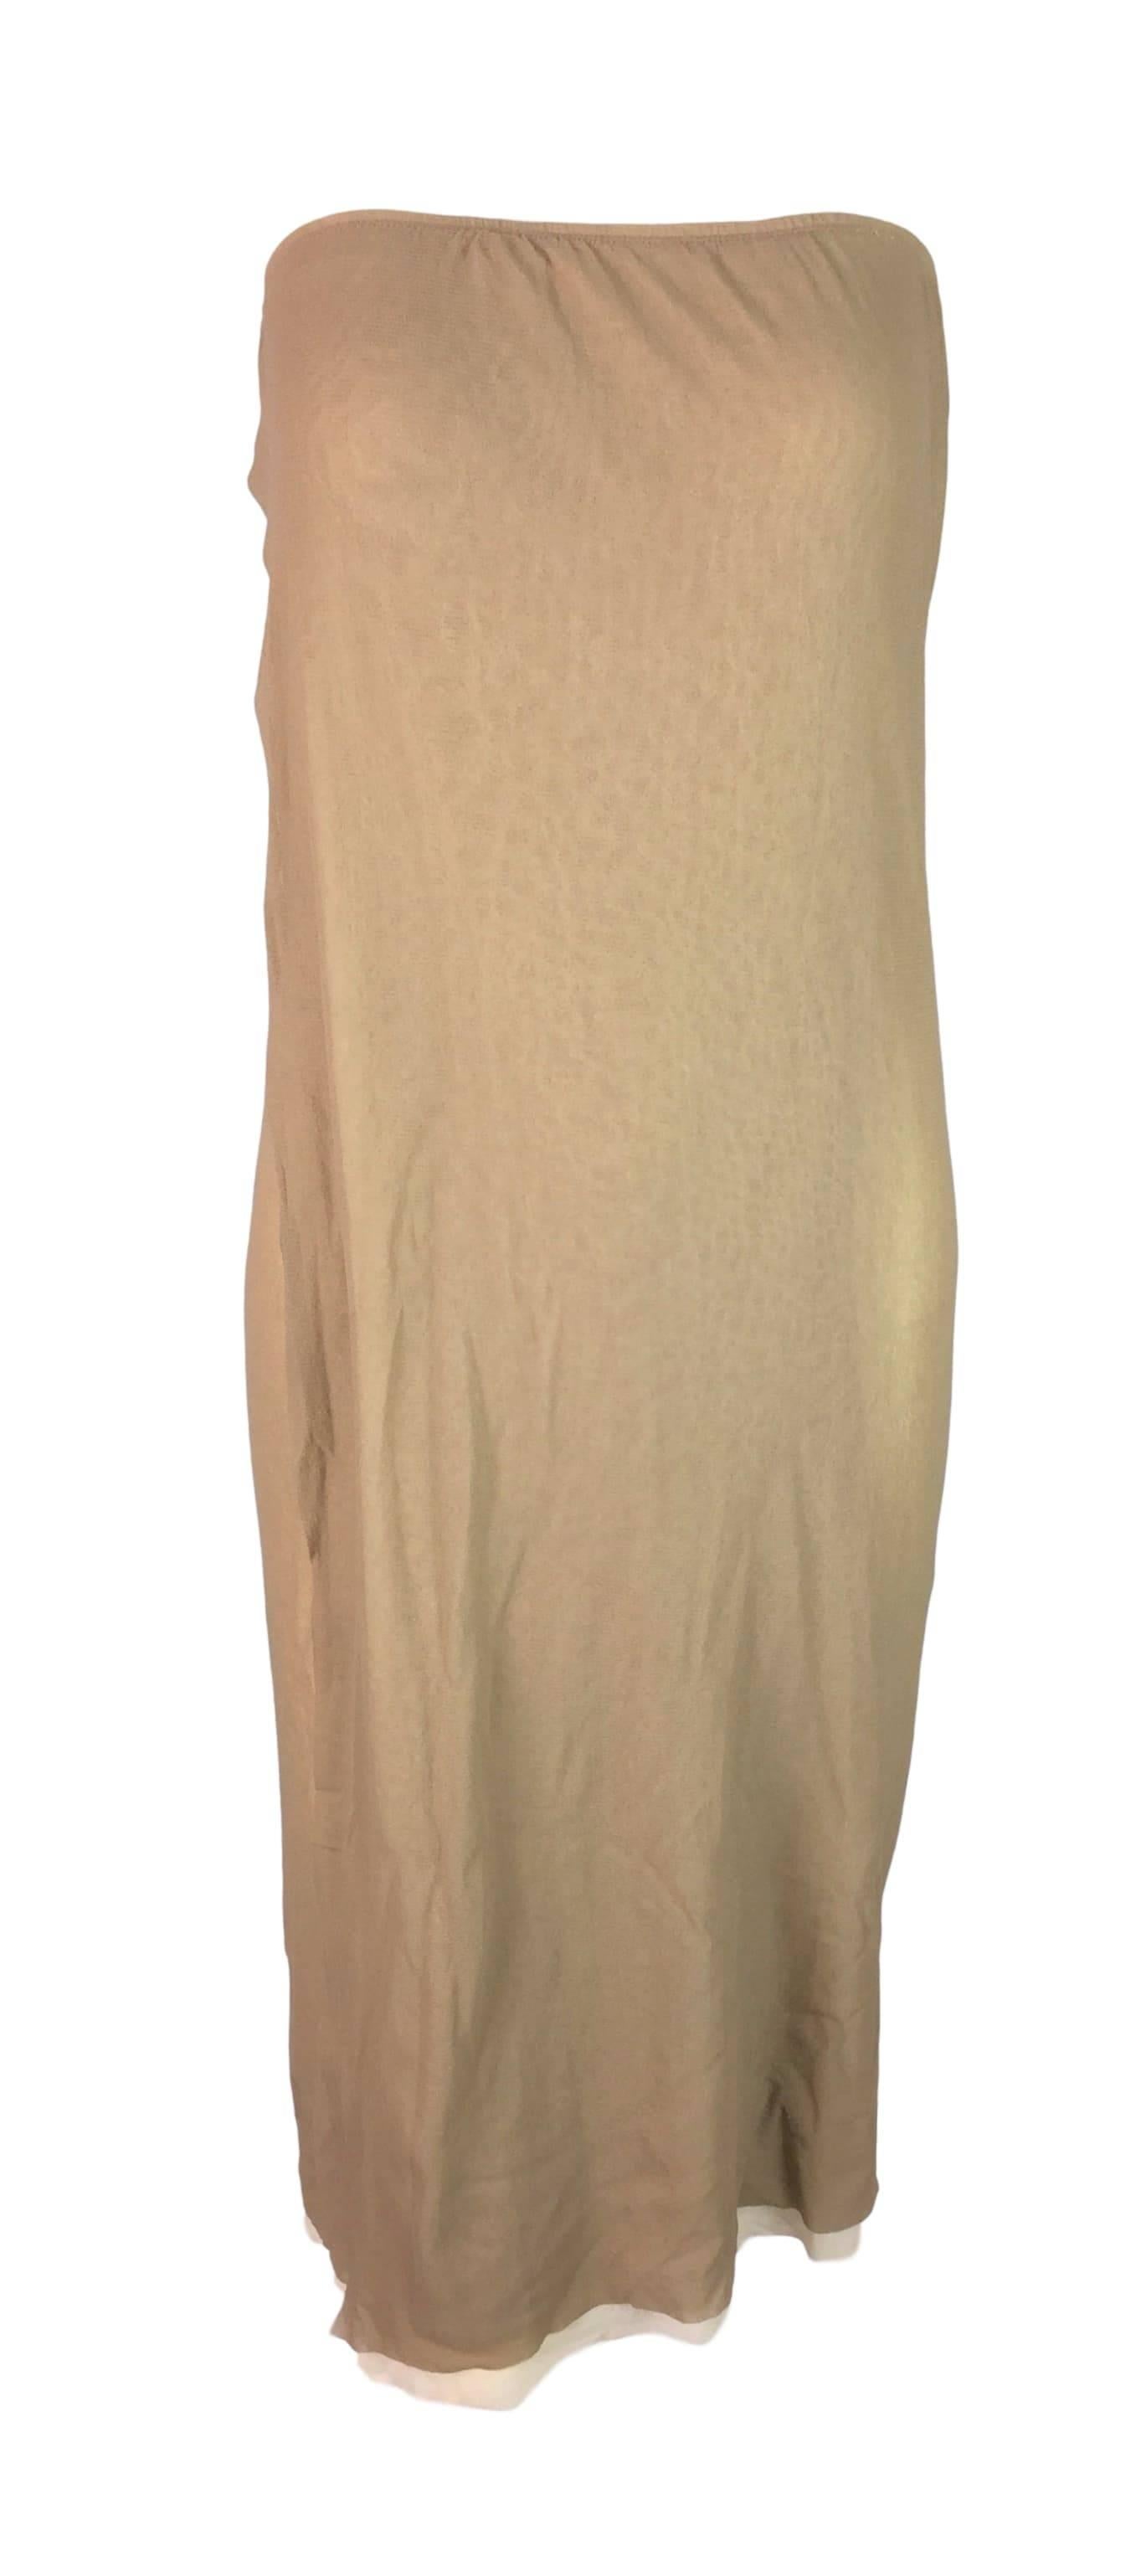 DESIGNER: 1990's Jean Paul Gaultier Classique- can be worn as a dress or skirt. 

Please contact for more information and/or photos.

CONDITION: New with tags

MATERIAL: Nylon blend

COUNTRY MADE: Italy

SIZE: Tag states medium but can fit an XS to